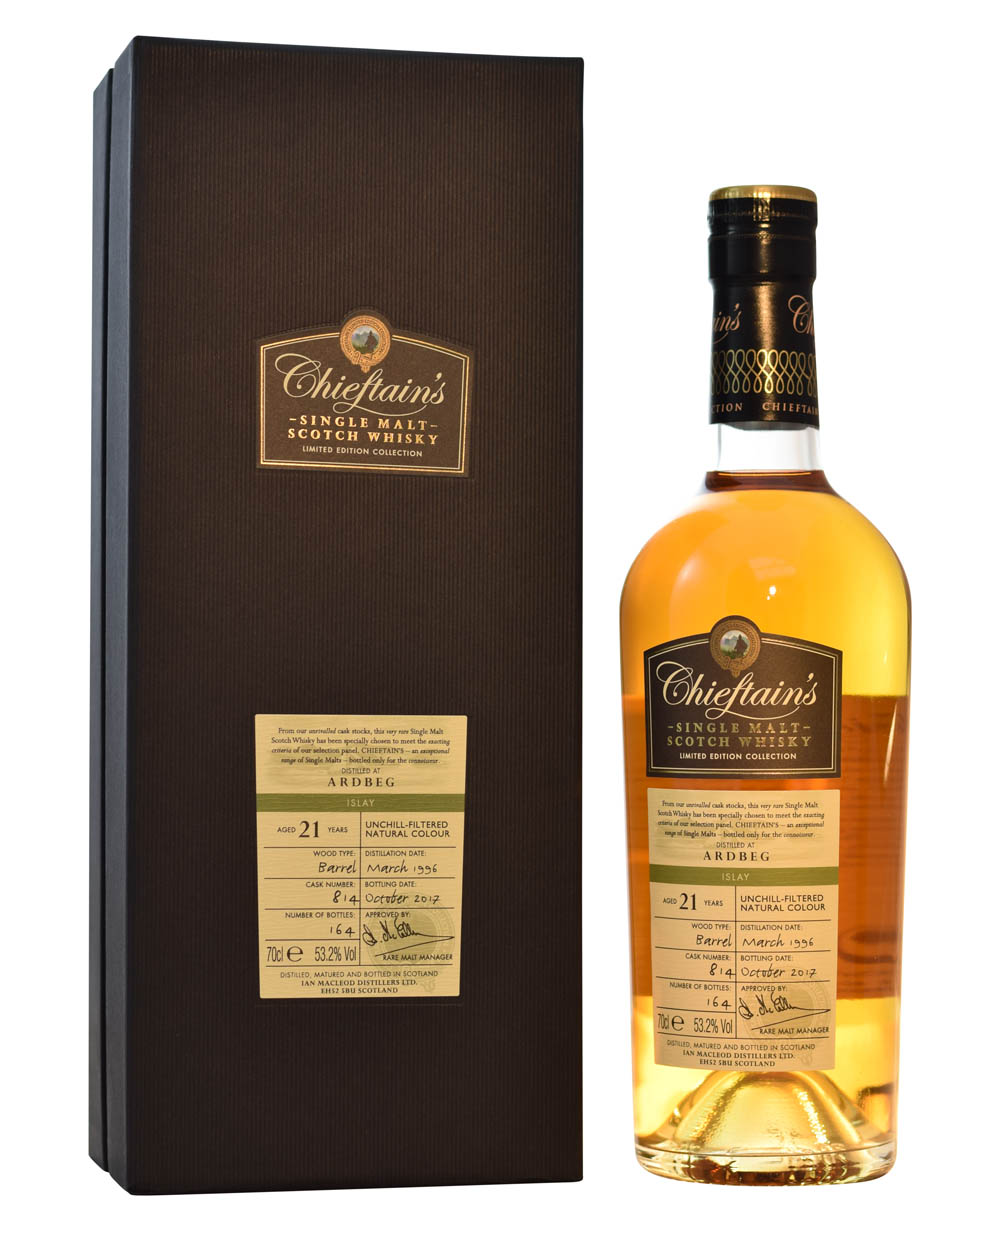 Ardbeg 1996 Chieftain's (21 Years Old) - Box Musthave Malts MHM